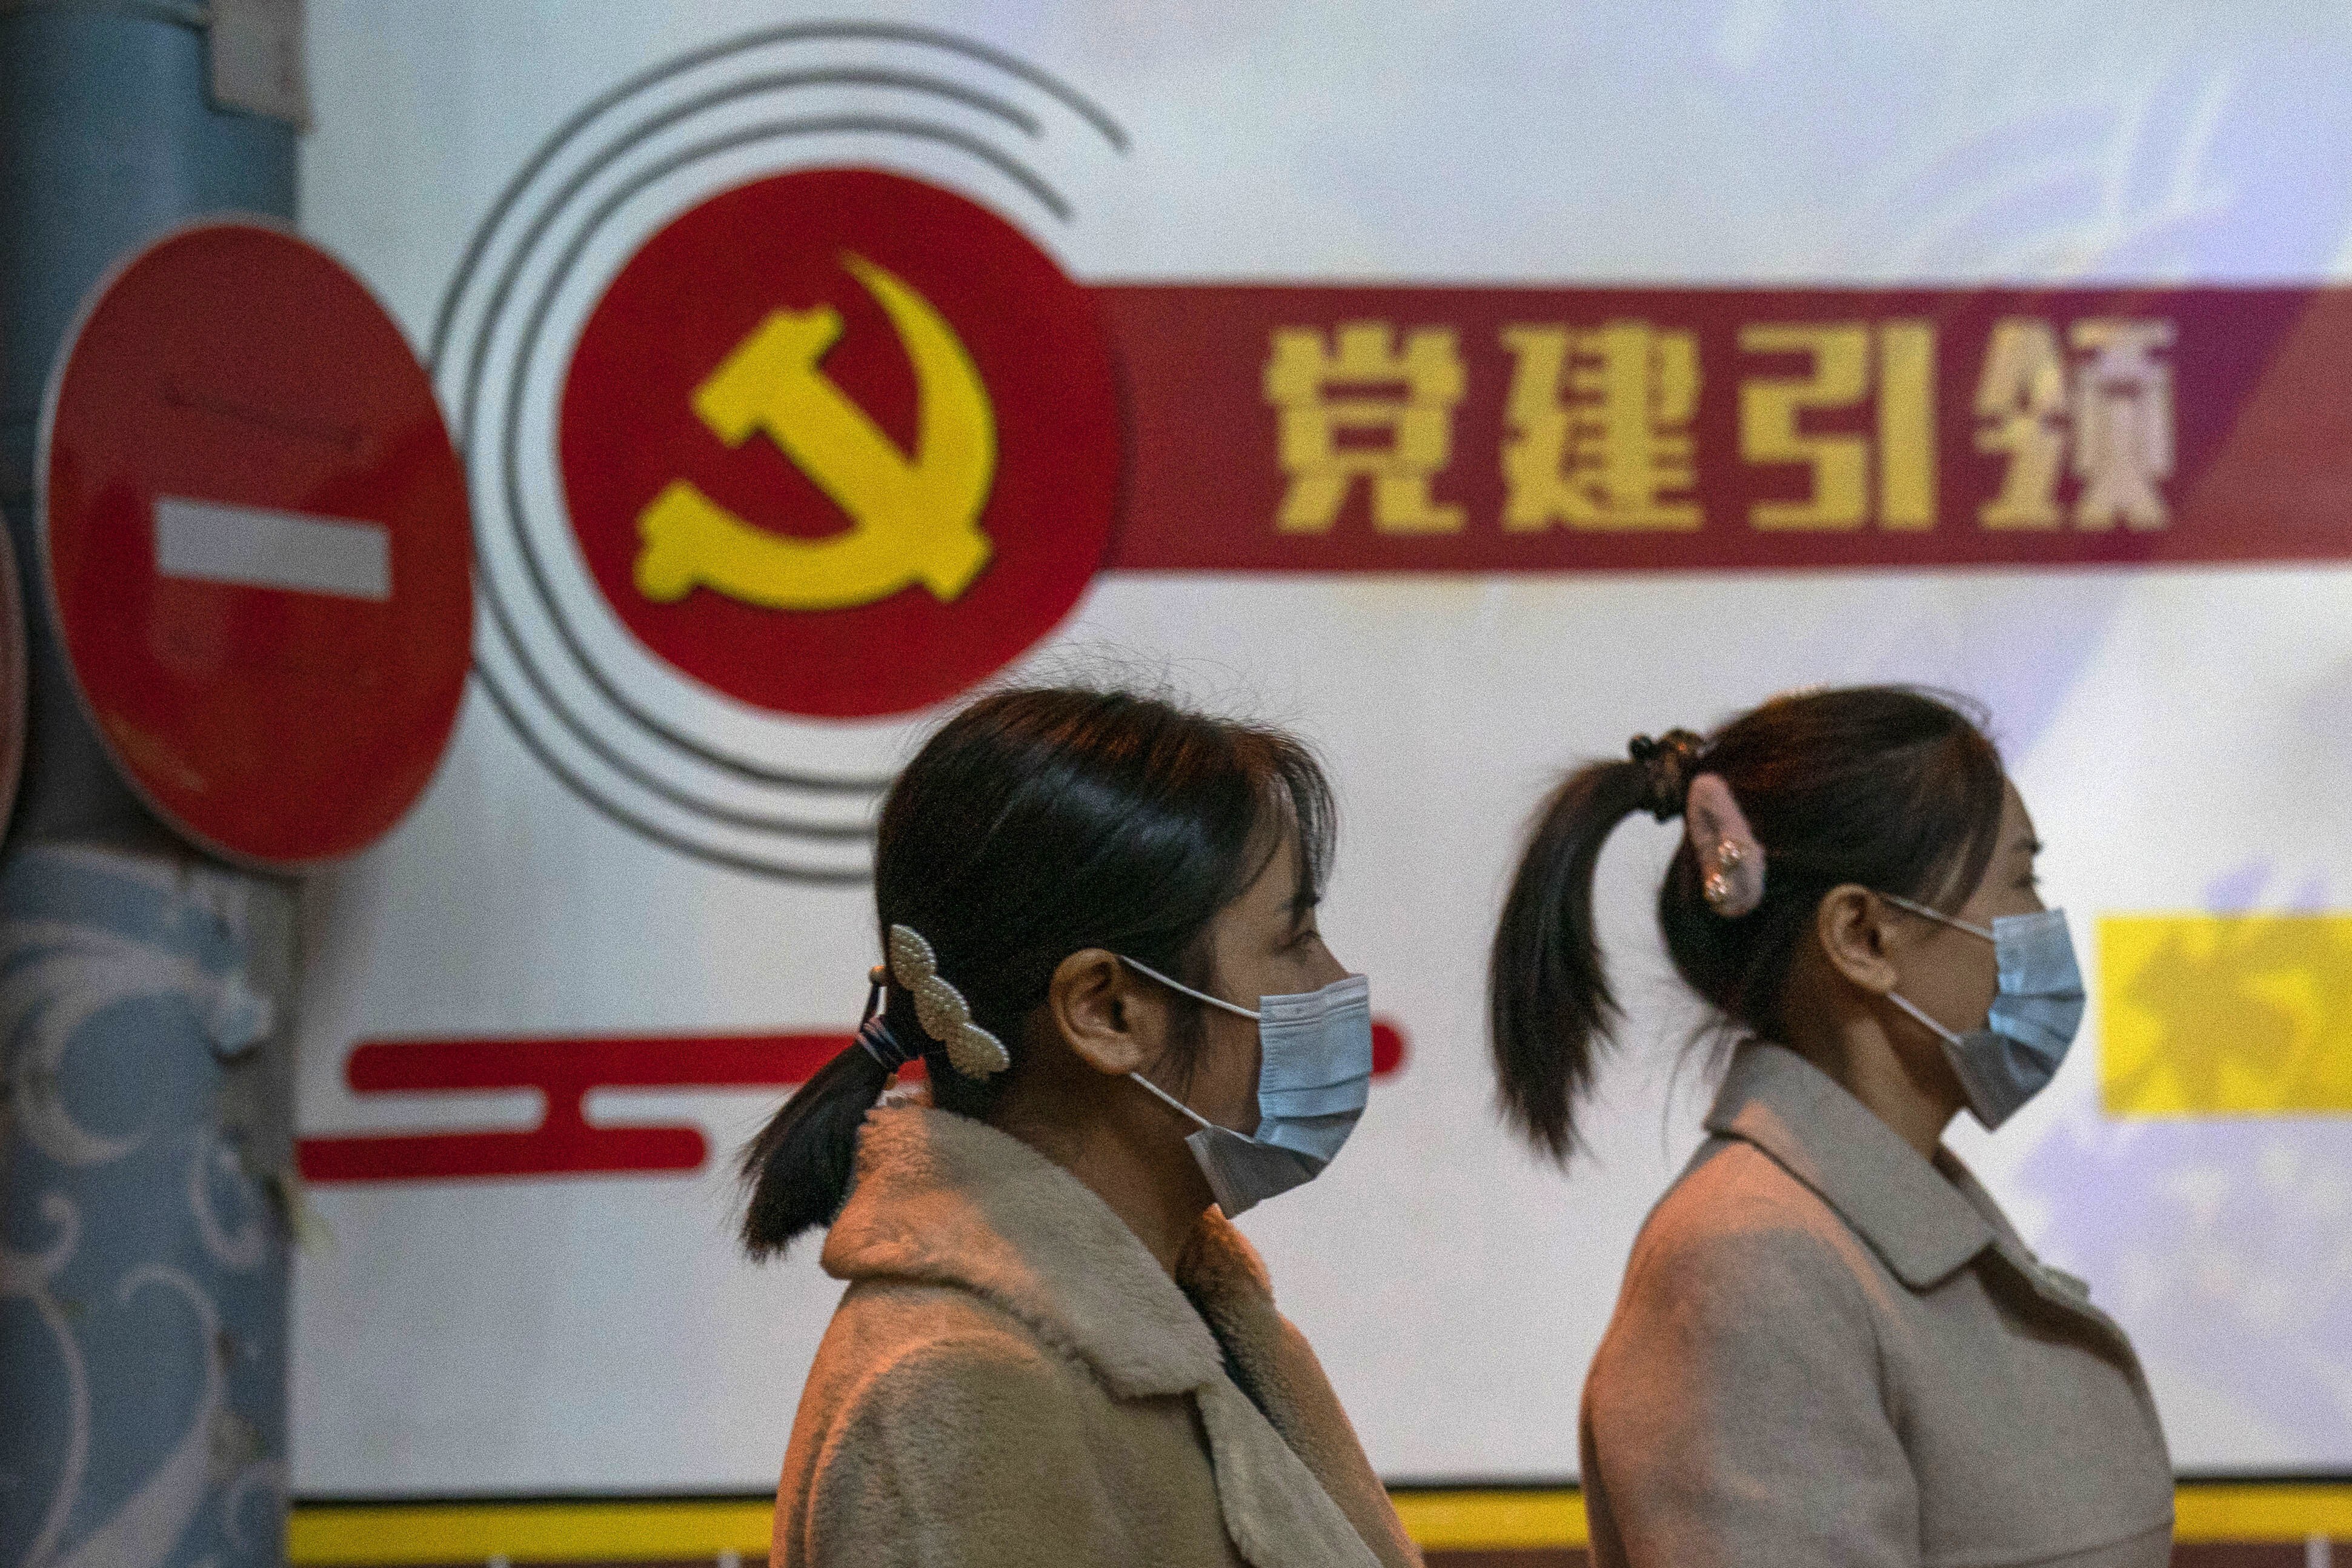 Pedestrians pass by the Communist Party logo and the slogan “Party building leadership” in Beijing on October 29. China says it will promote technological self-reliance in its latest five-year plan while still opening further to trade. Photo: AP